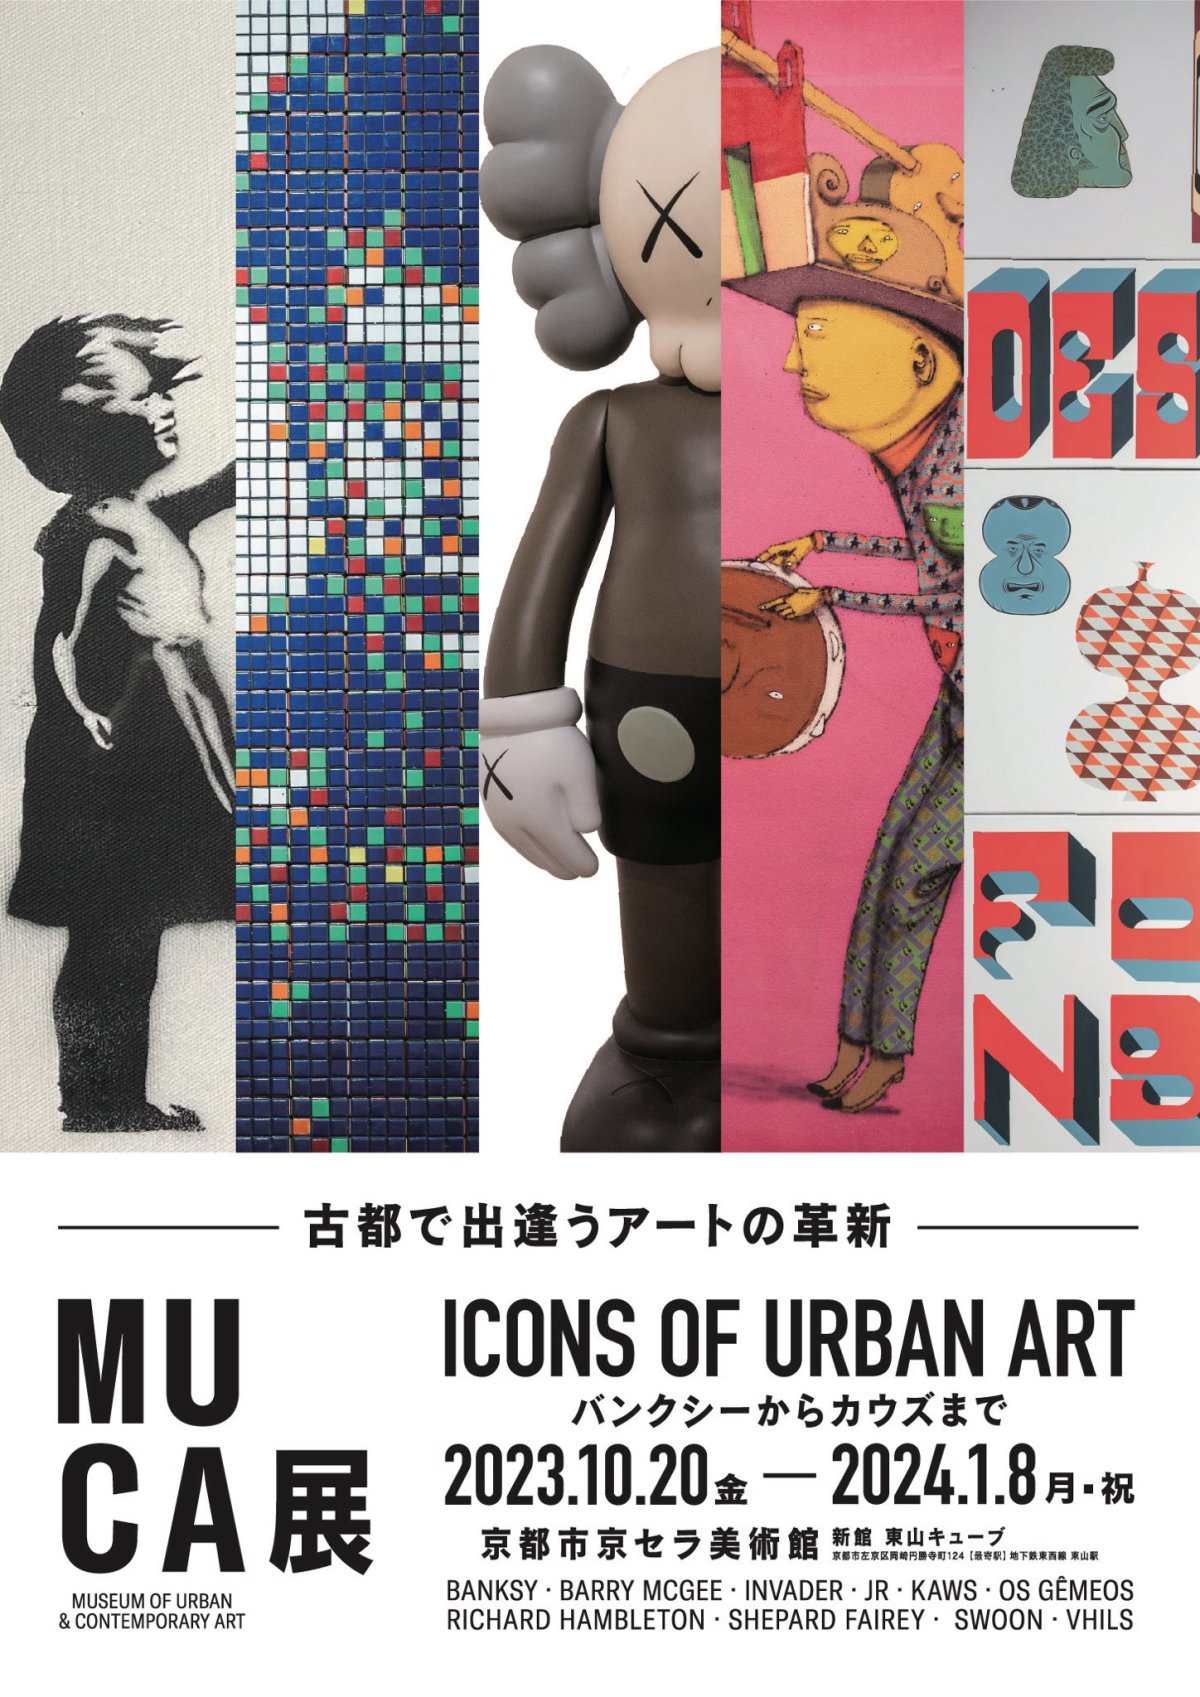 MUCA Exhibition Icons of Urban Art - From Banksy to Kaws （Kyoto